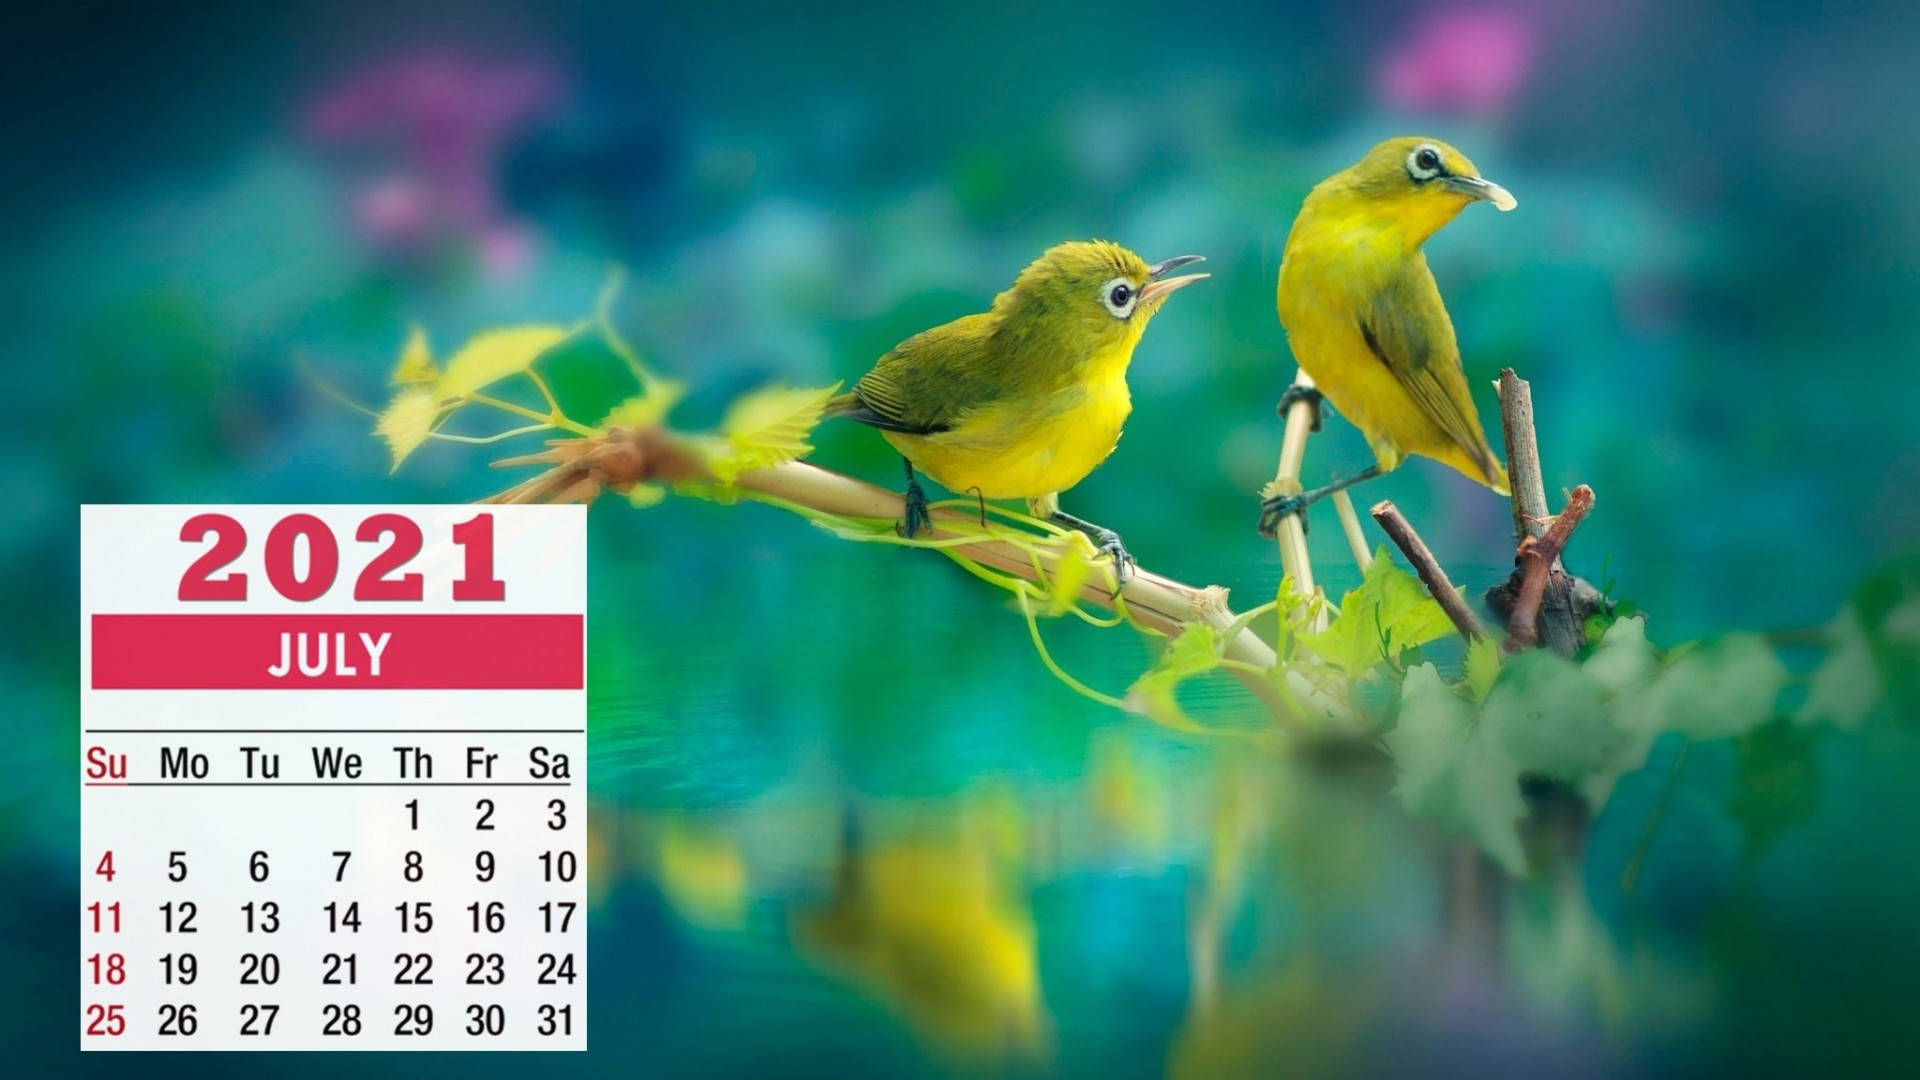 Welcome the arrival of July with two vibrant green birds Wallpaper